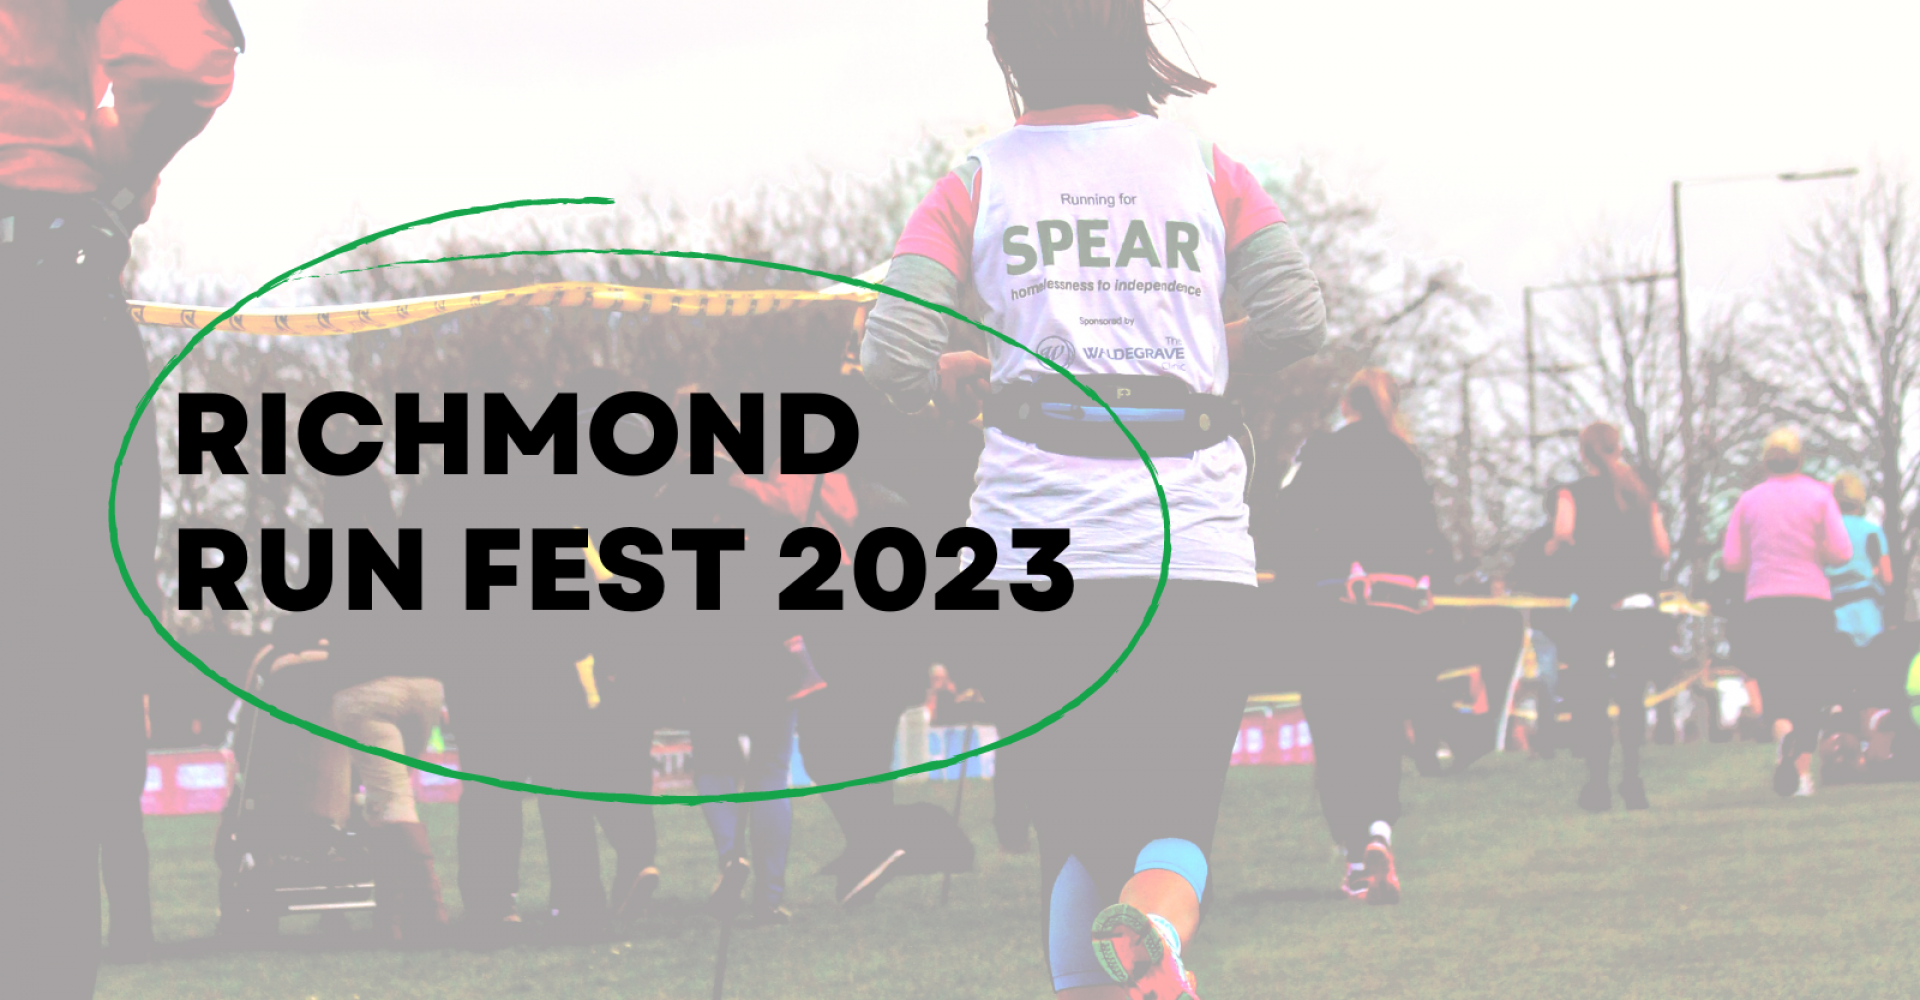 The Richmond RunFest is a family-friendly event that runs over the weekend of the 9th (10 KM) and 10th (half marathon) of September 2023